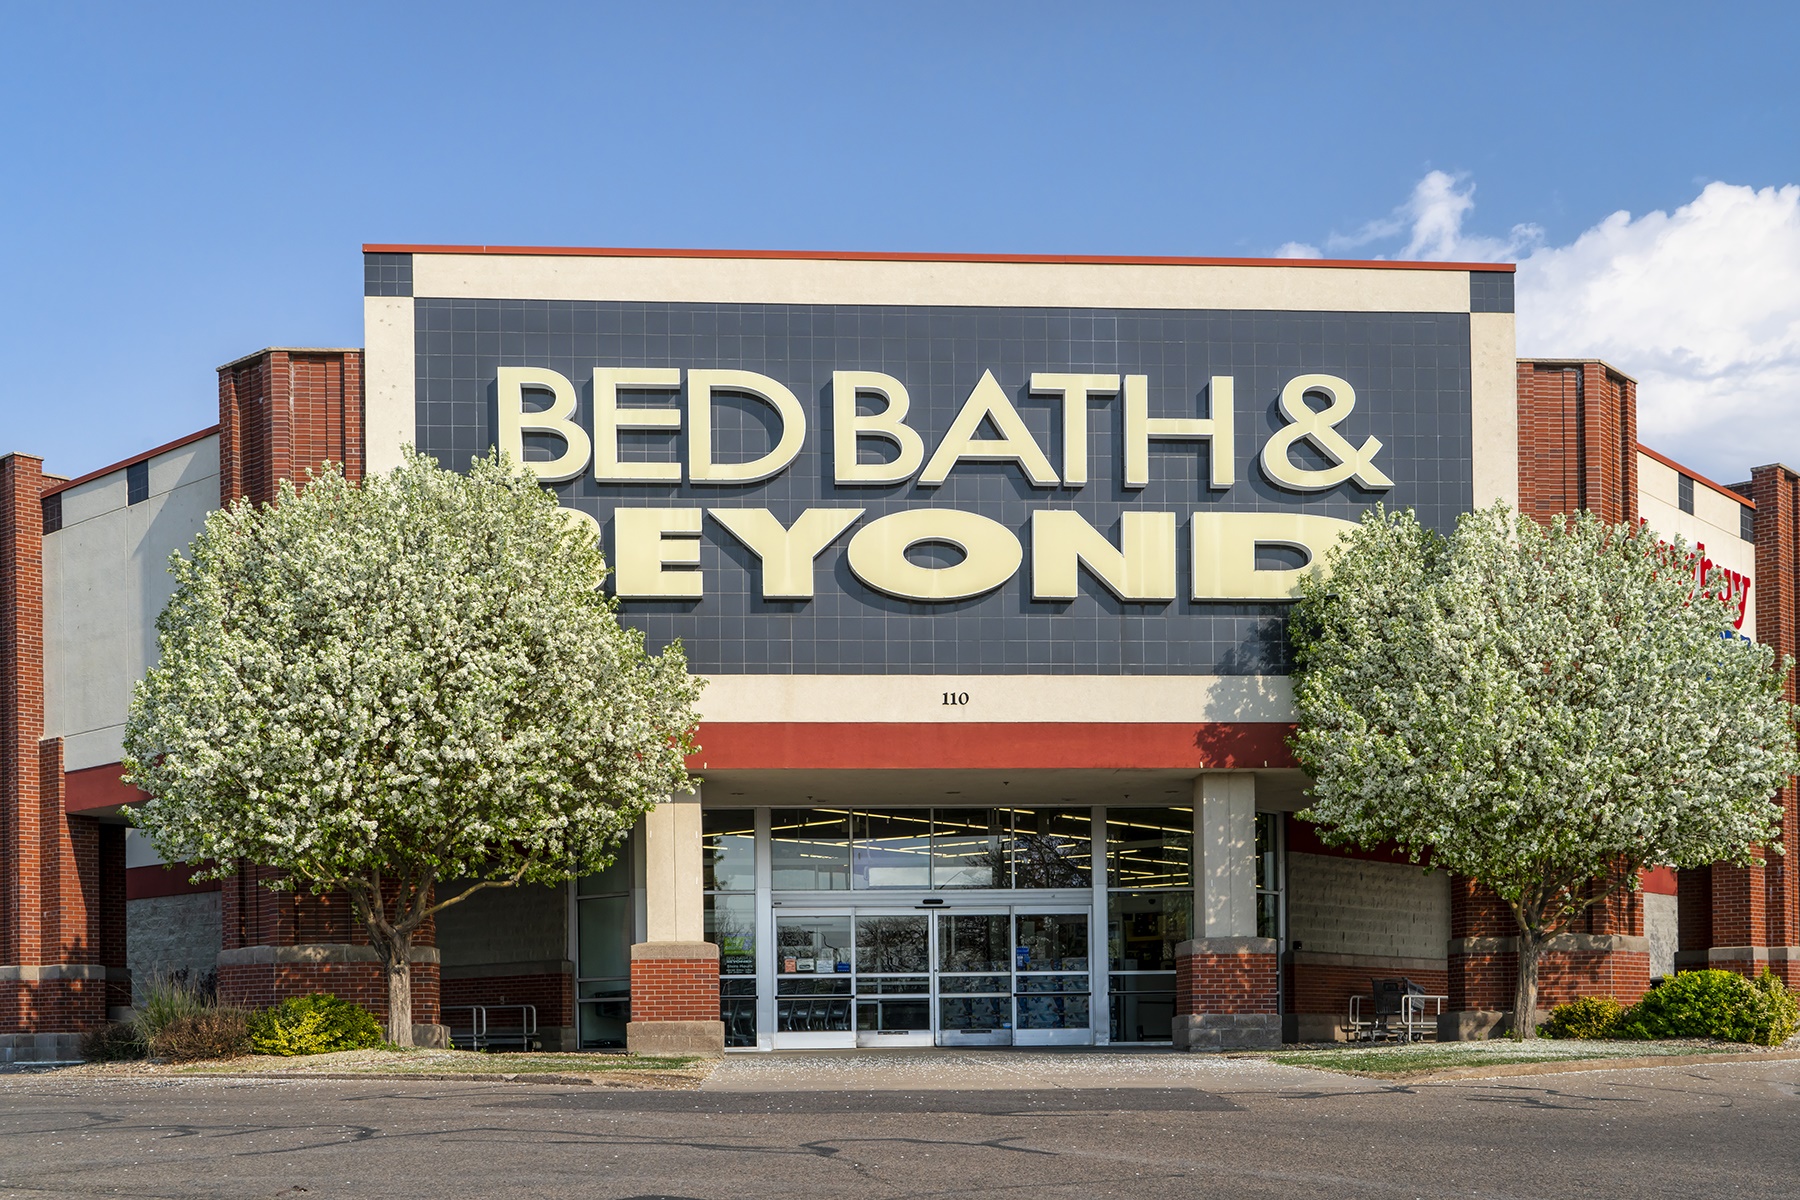 Bed Bath & Beyond To Pull Plug On At Least 40 Stores This Year